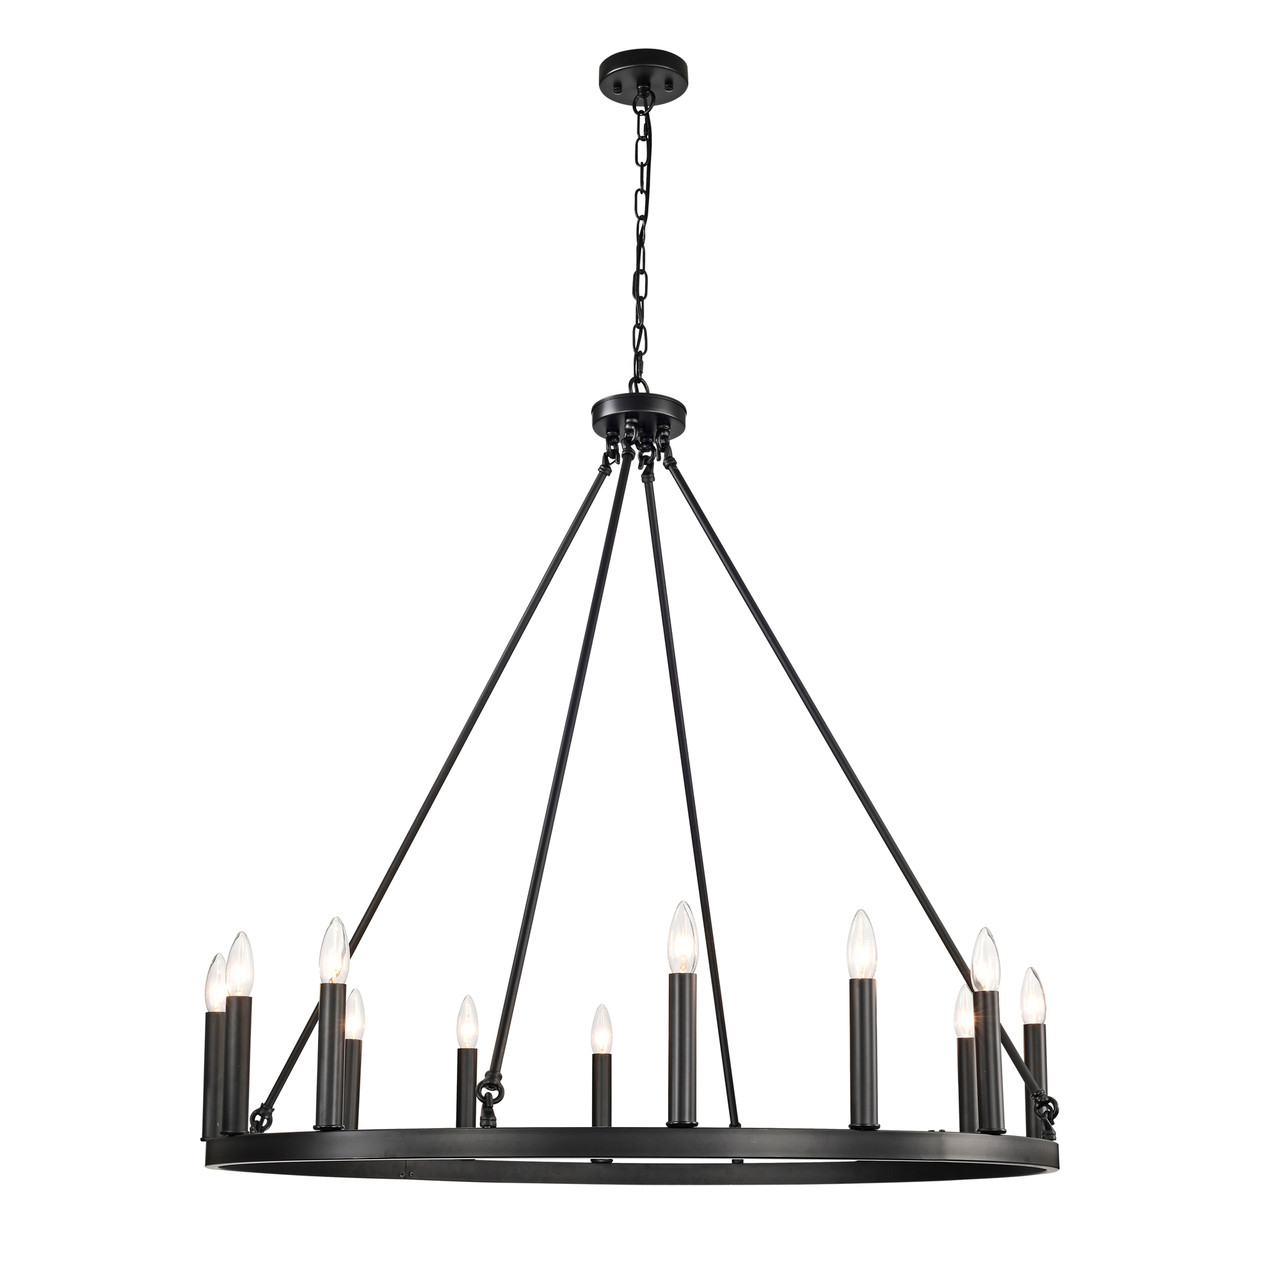 WAREHOUSE OF TIFFANY'S GD01-26MB Bride 40 in. 12-Light Indoor Matte Black Finish Chandelier with Light Kit